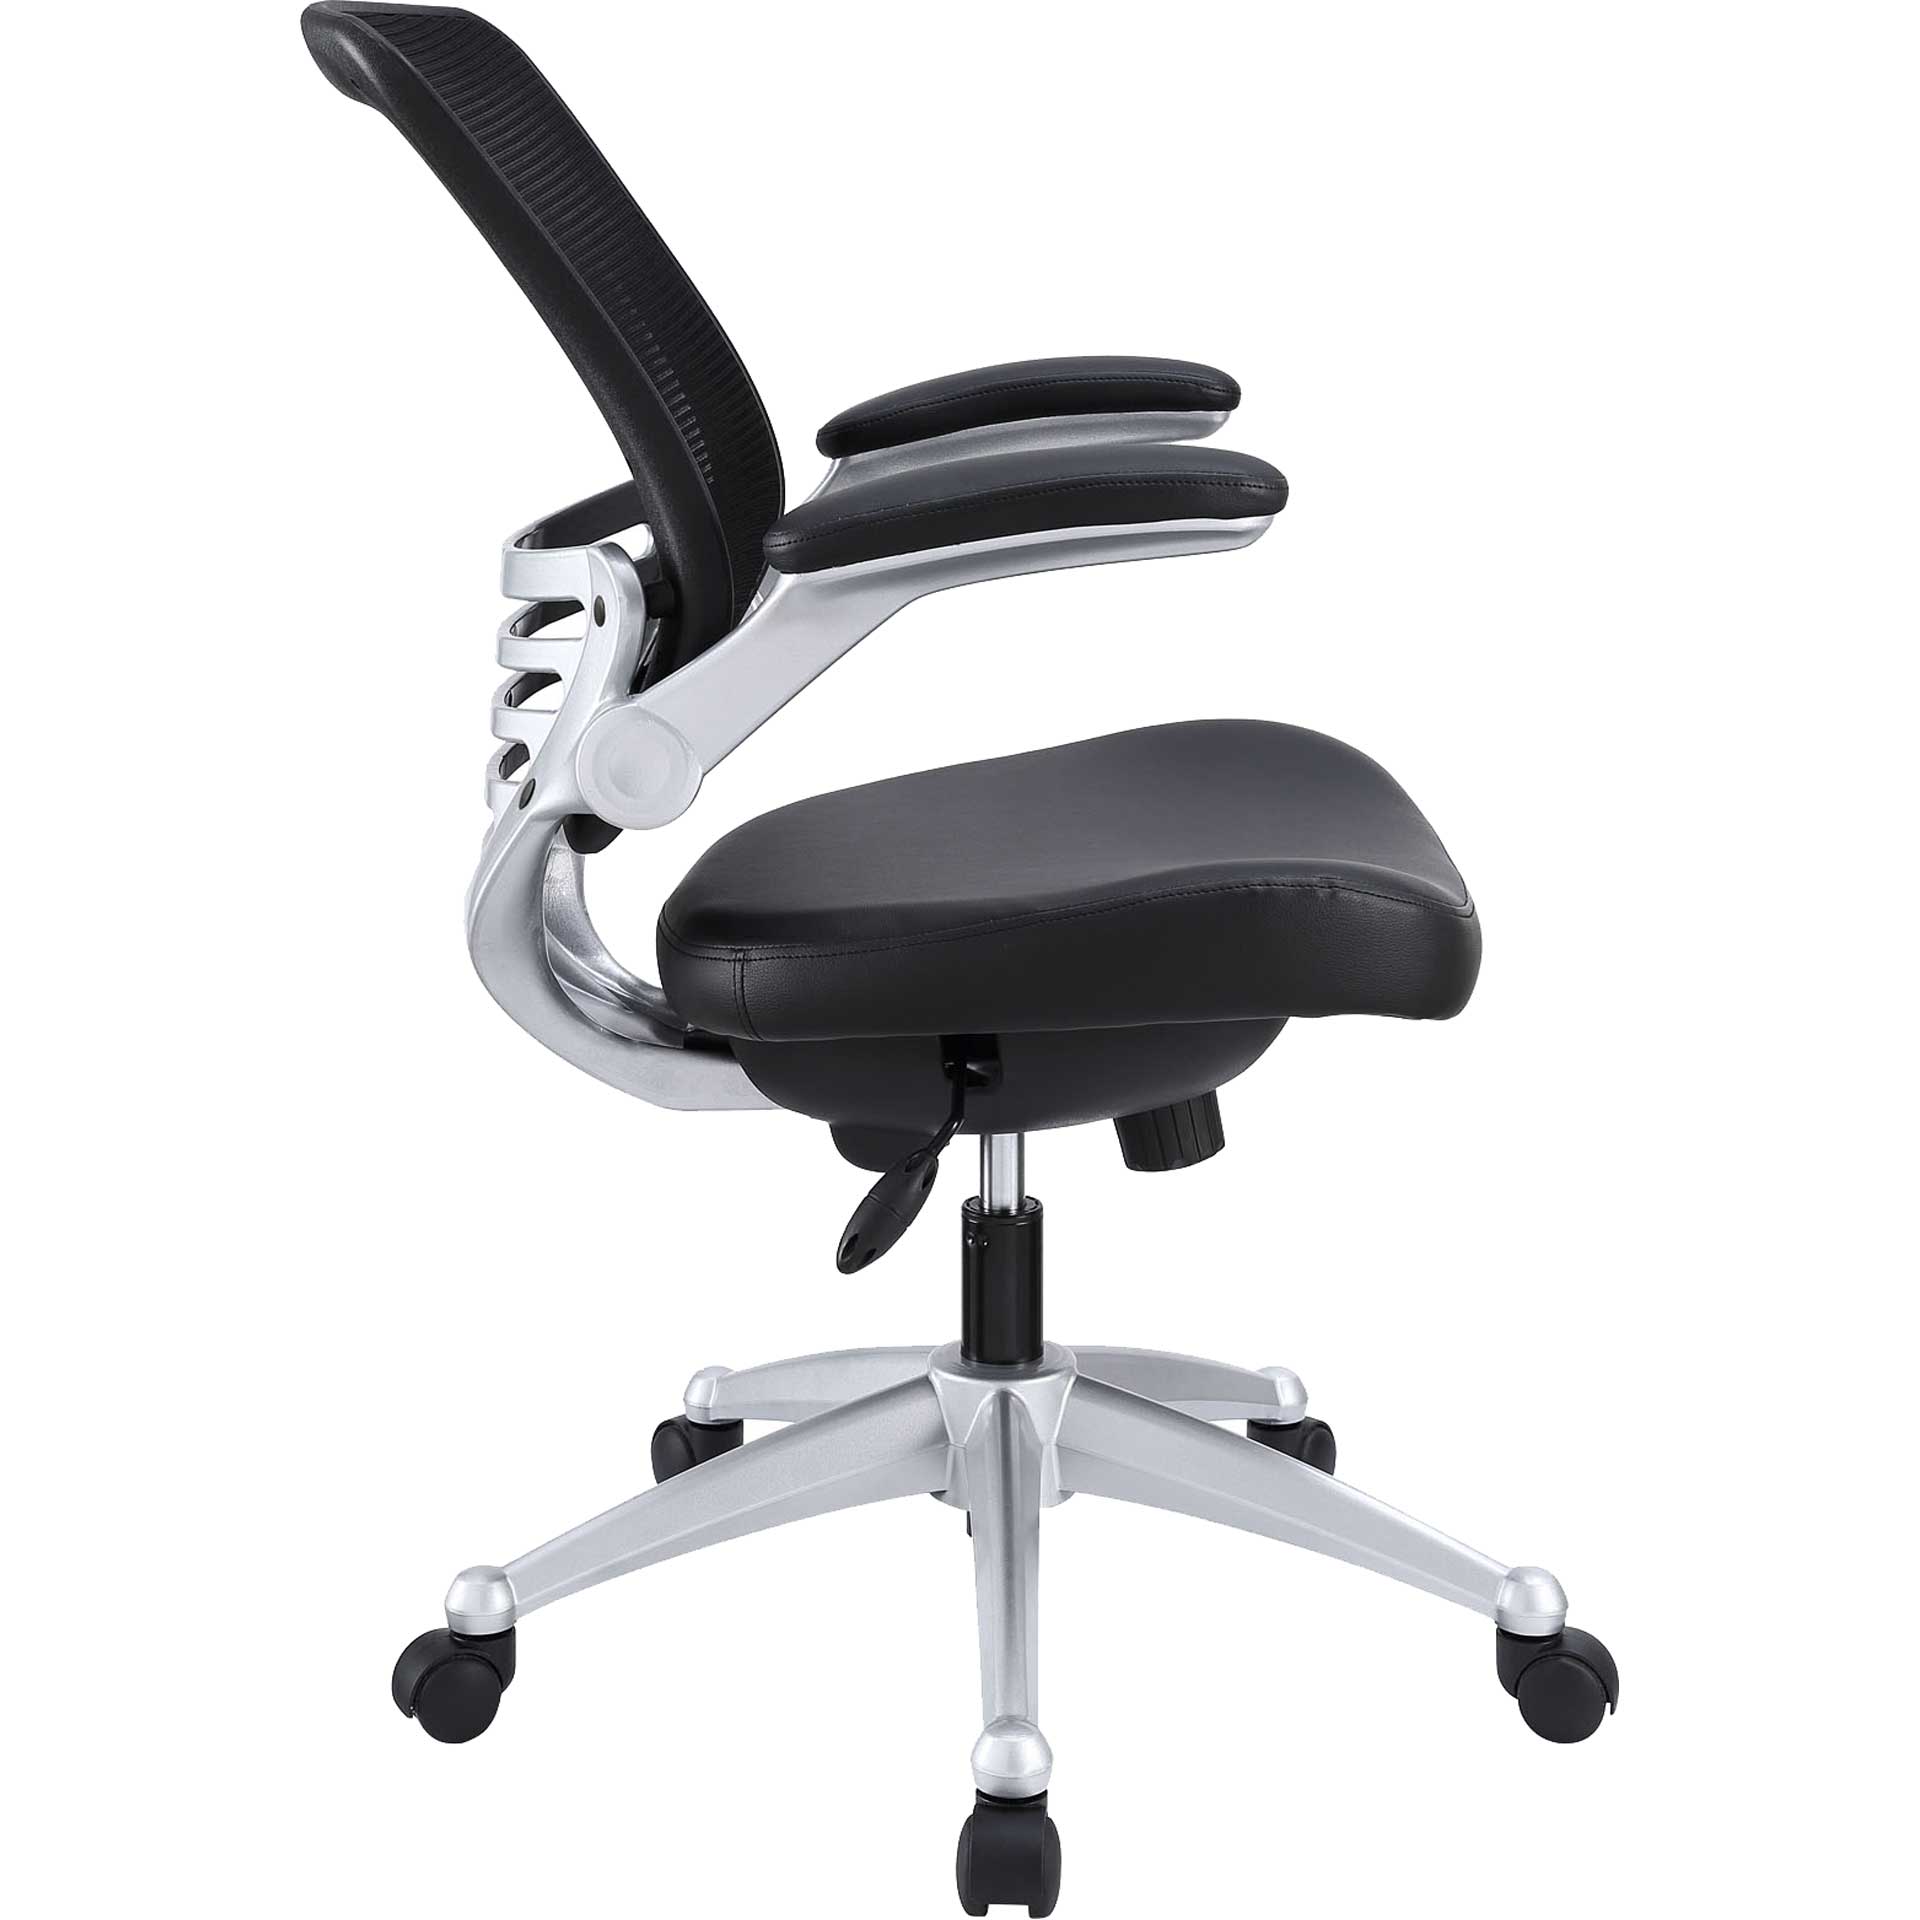 Eloise Leather Office Chair Black